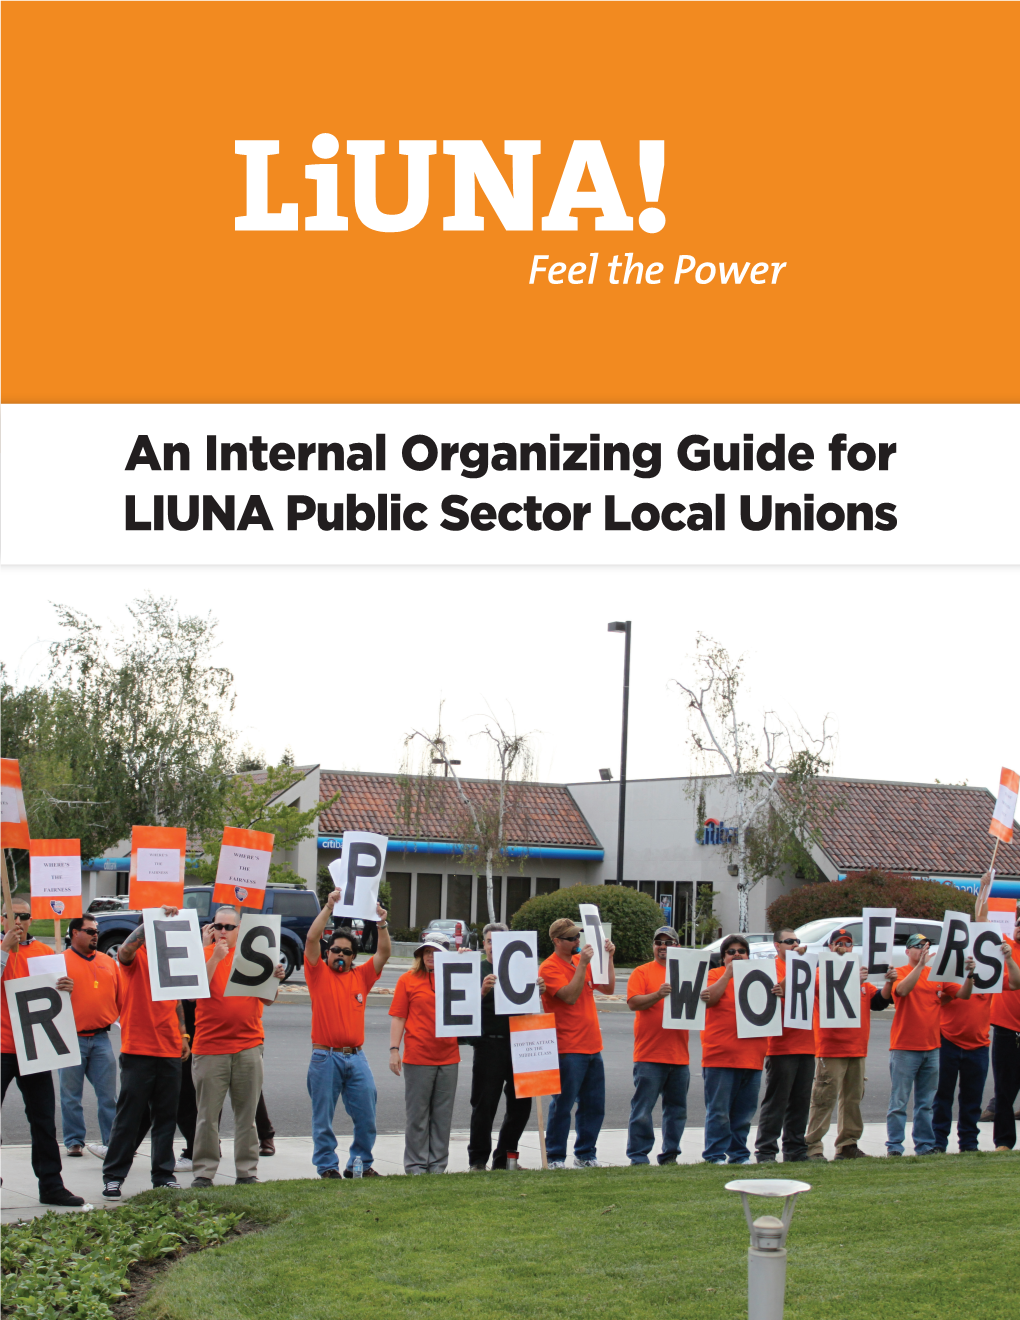 An Internal Organizing Guide for LIUNA Public Sector Local Unions